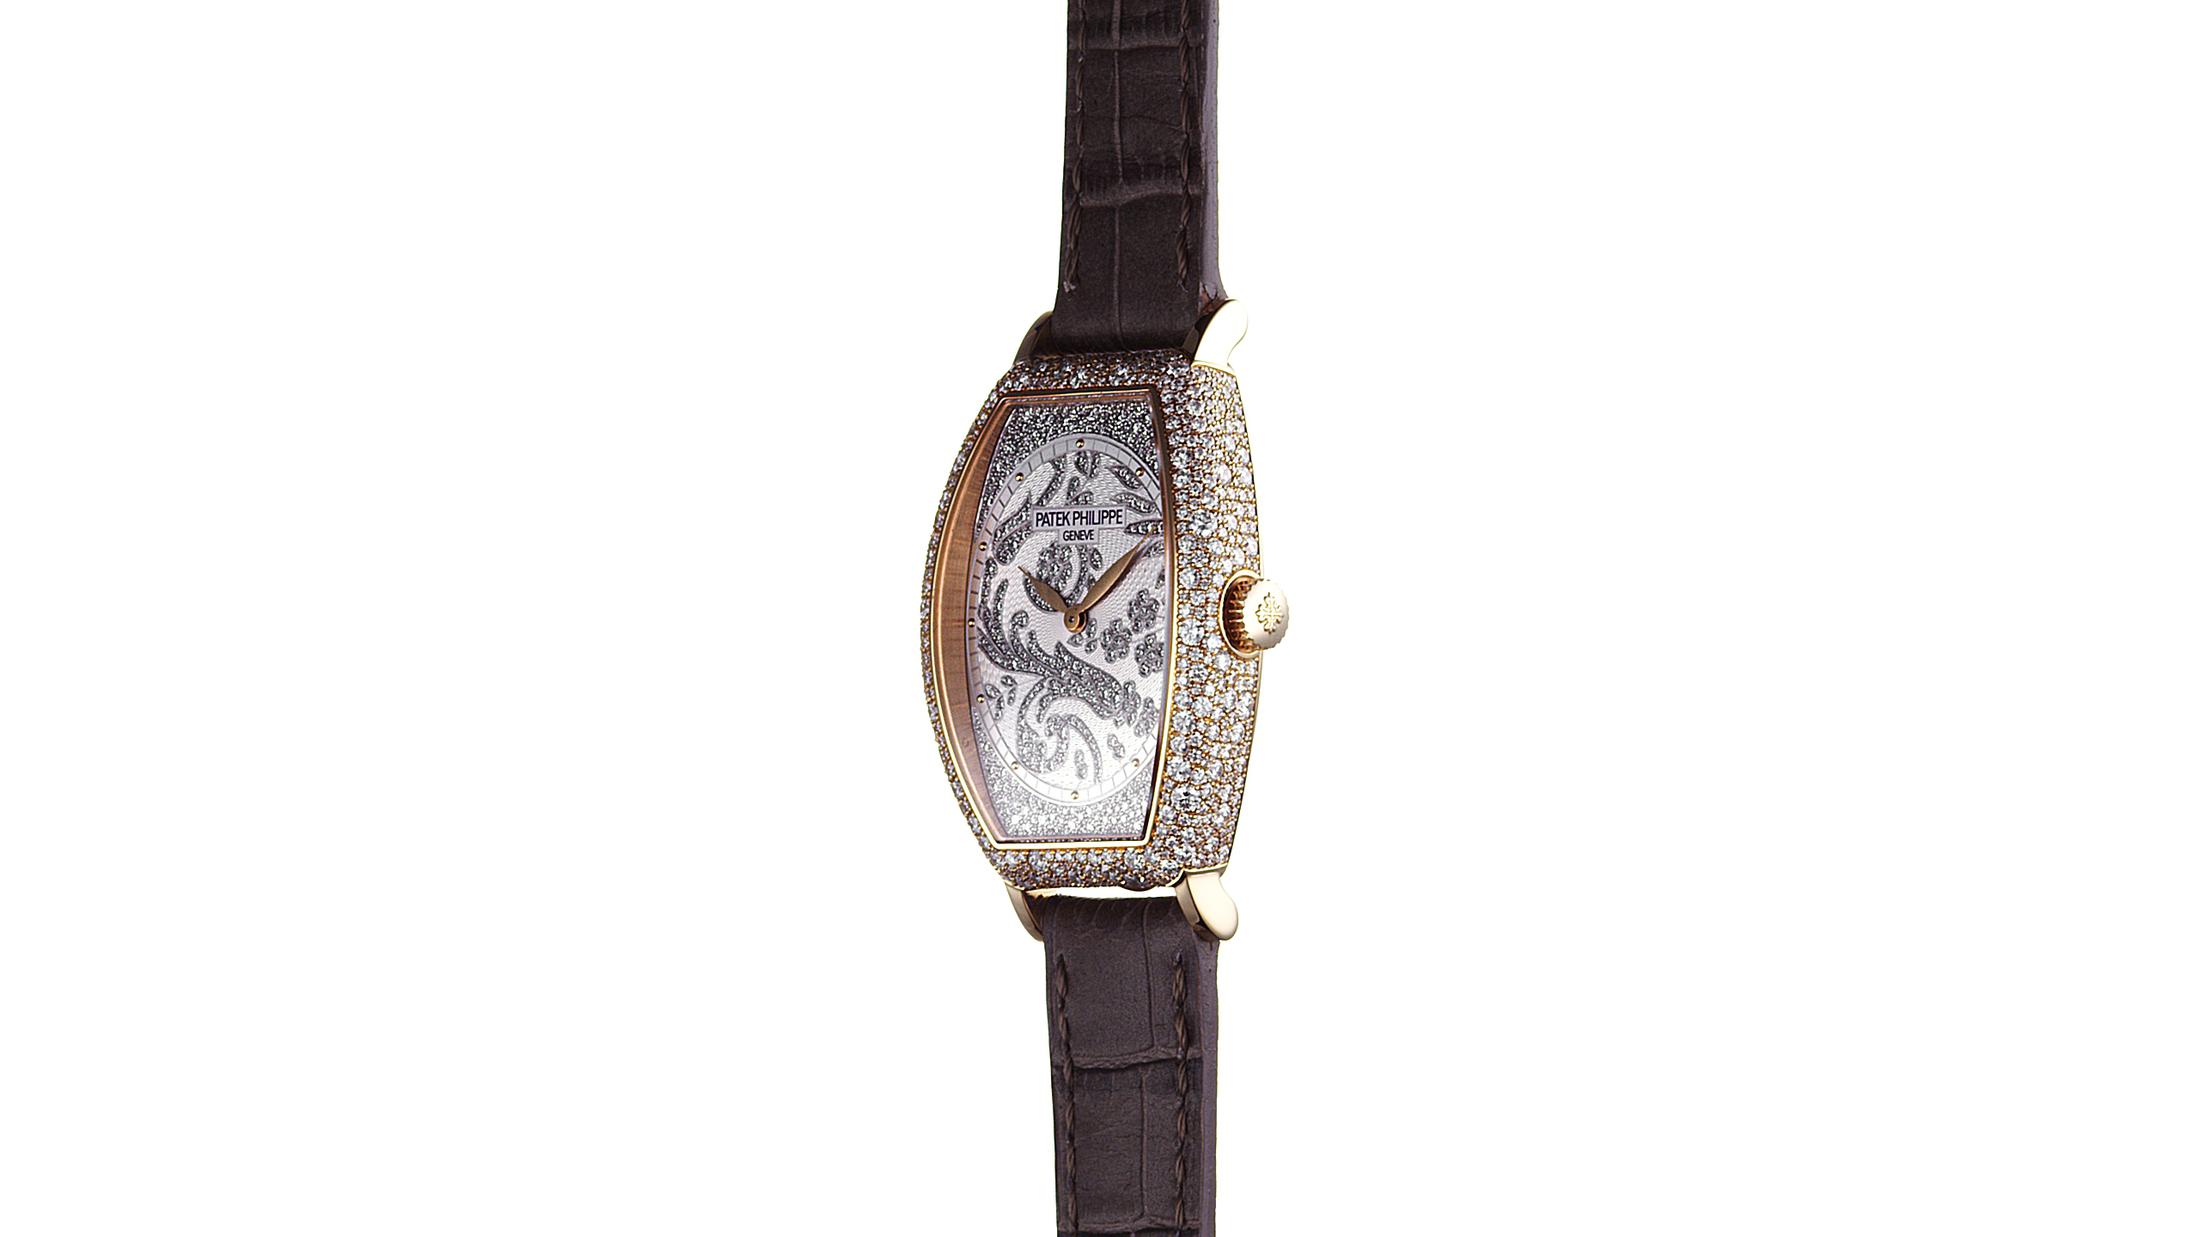 Patek Philippe 5059J 5059J Retrograde Perpetual Calendar in Yellow Gold - on Black Leather Strap with White Dial